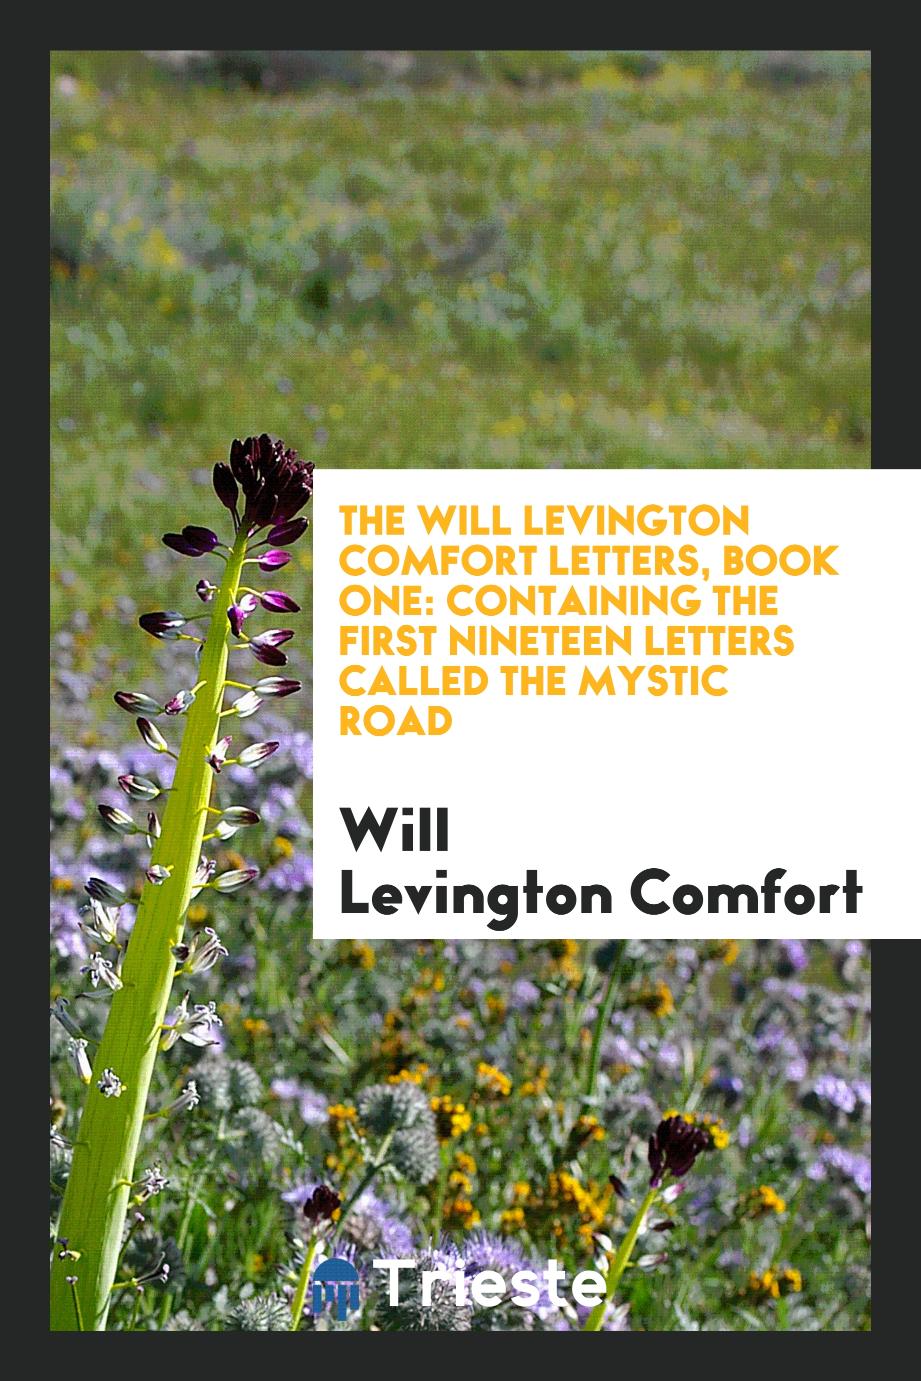 The Will Levington Comfort Letters, Book One: Containing the First Nineteen Letters Called the Mystic Road